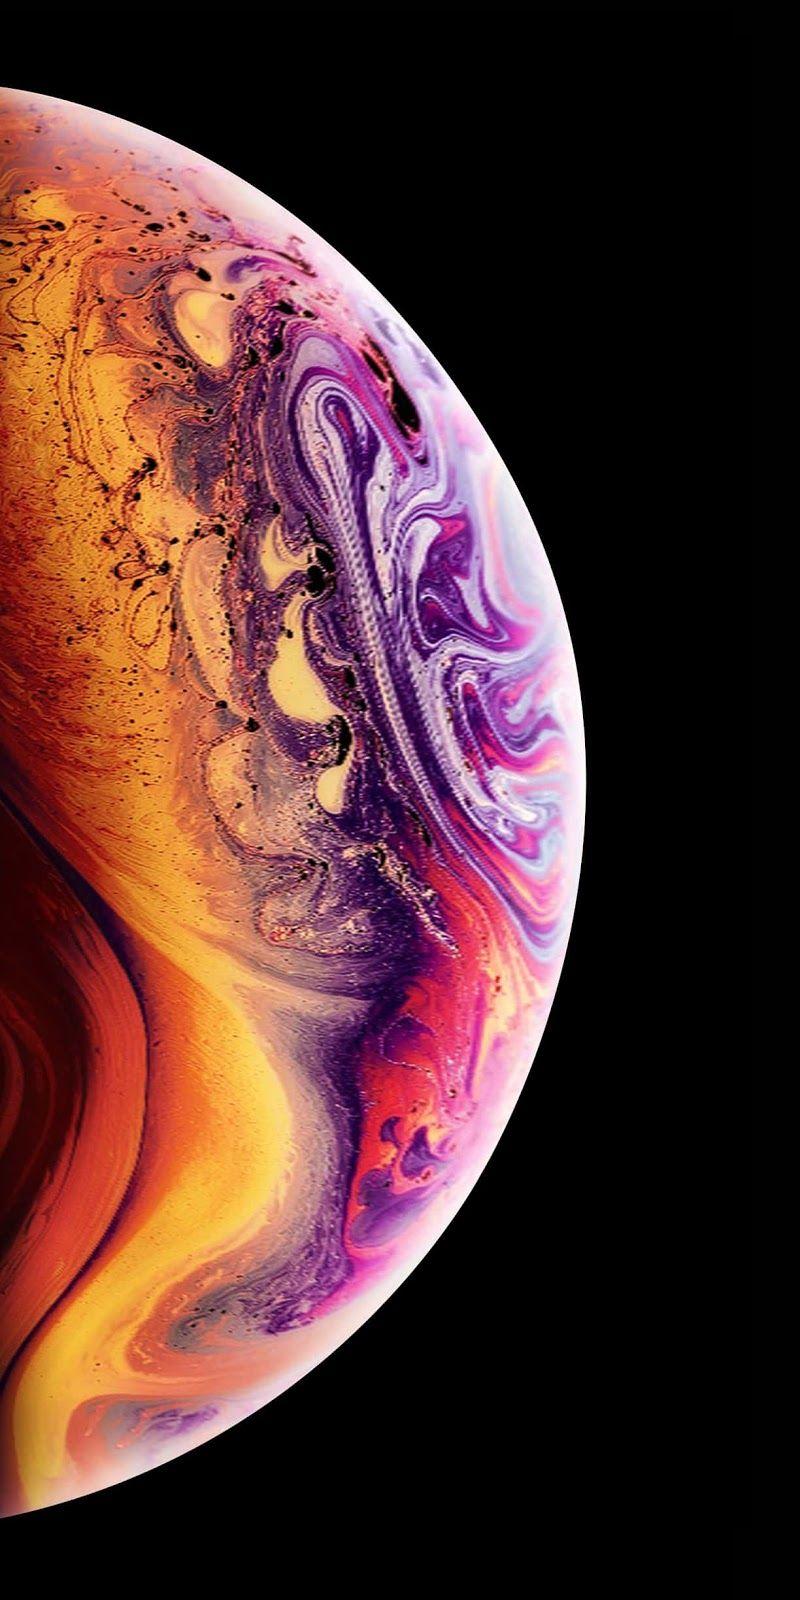 Download the stock wallpaper of iphone Xs, Xs Max and XR